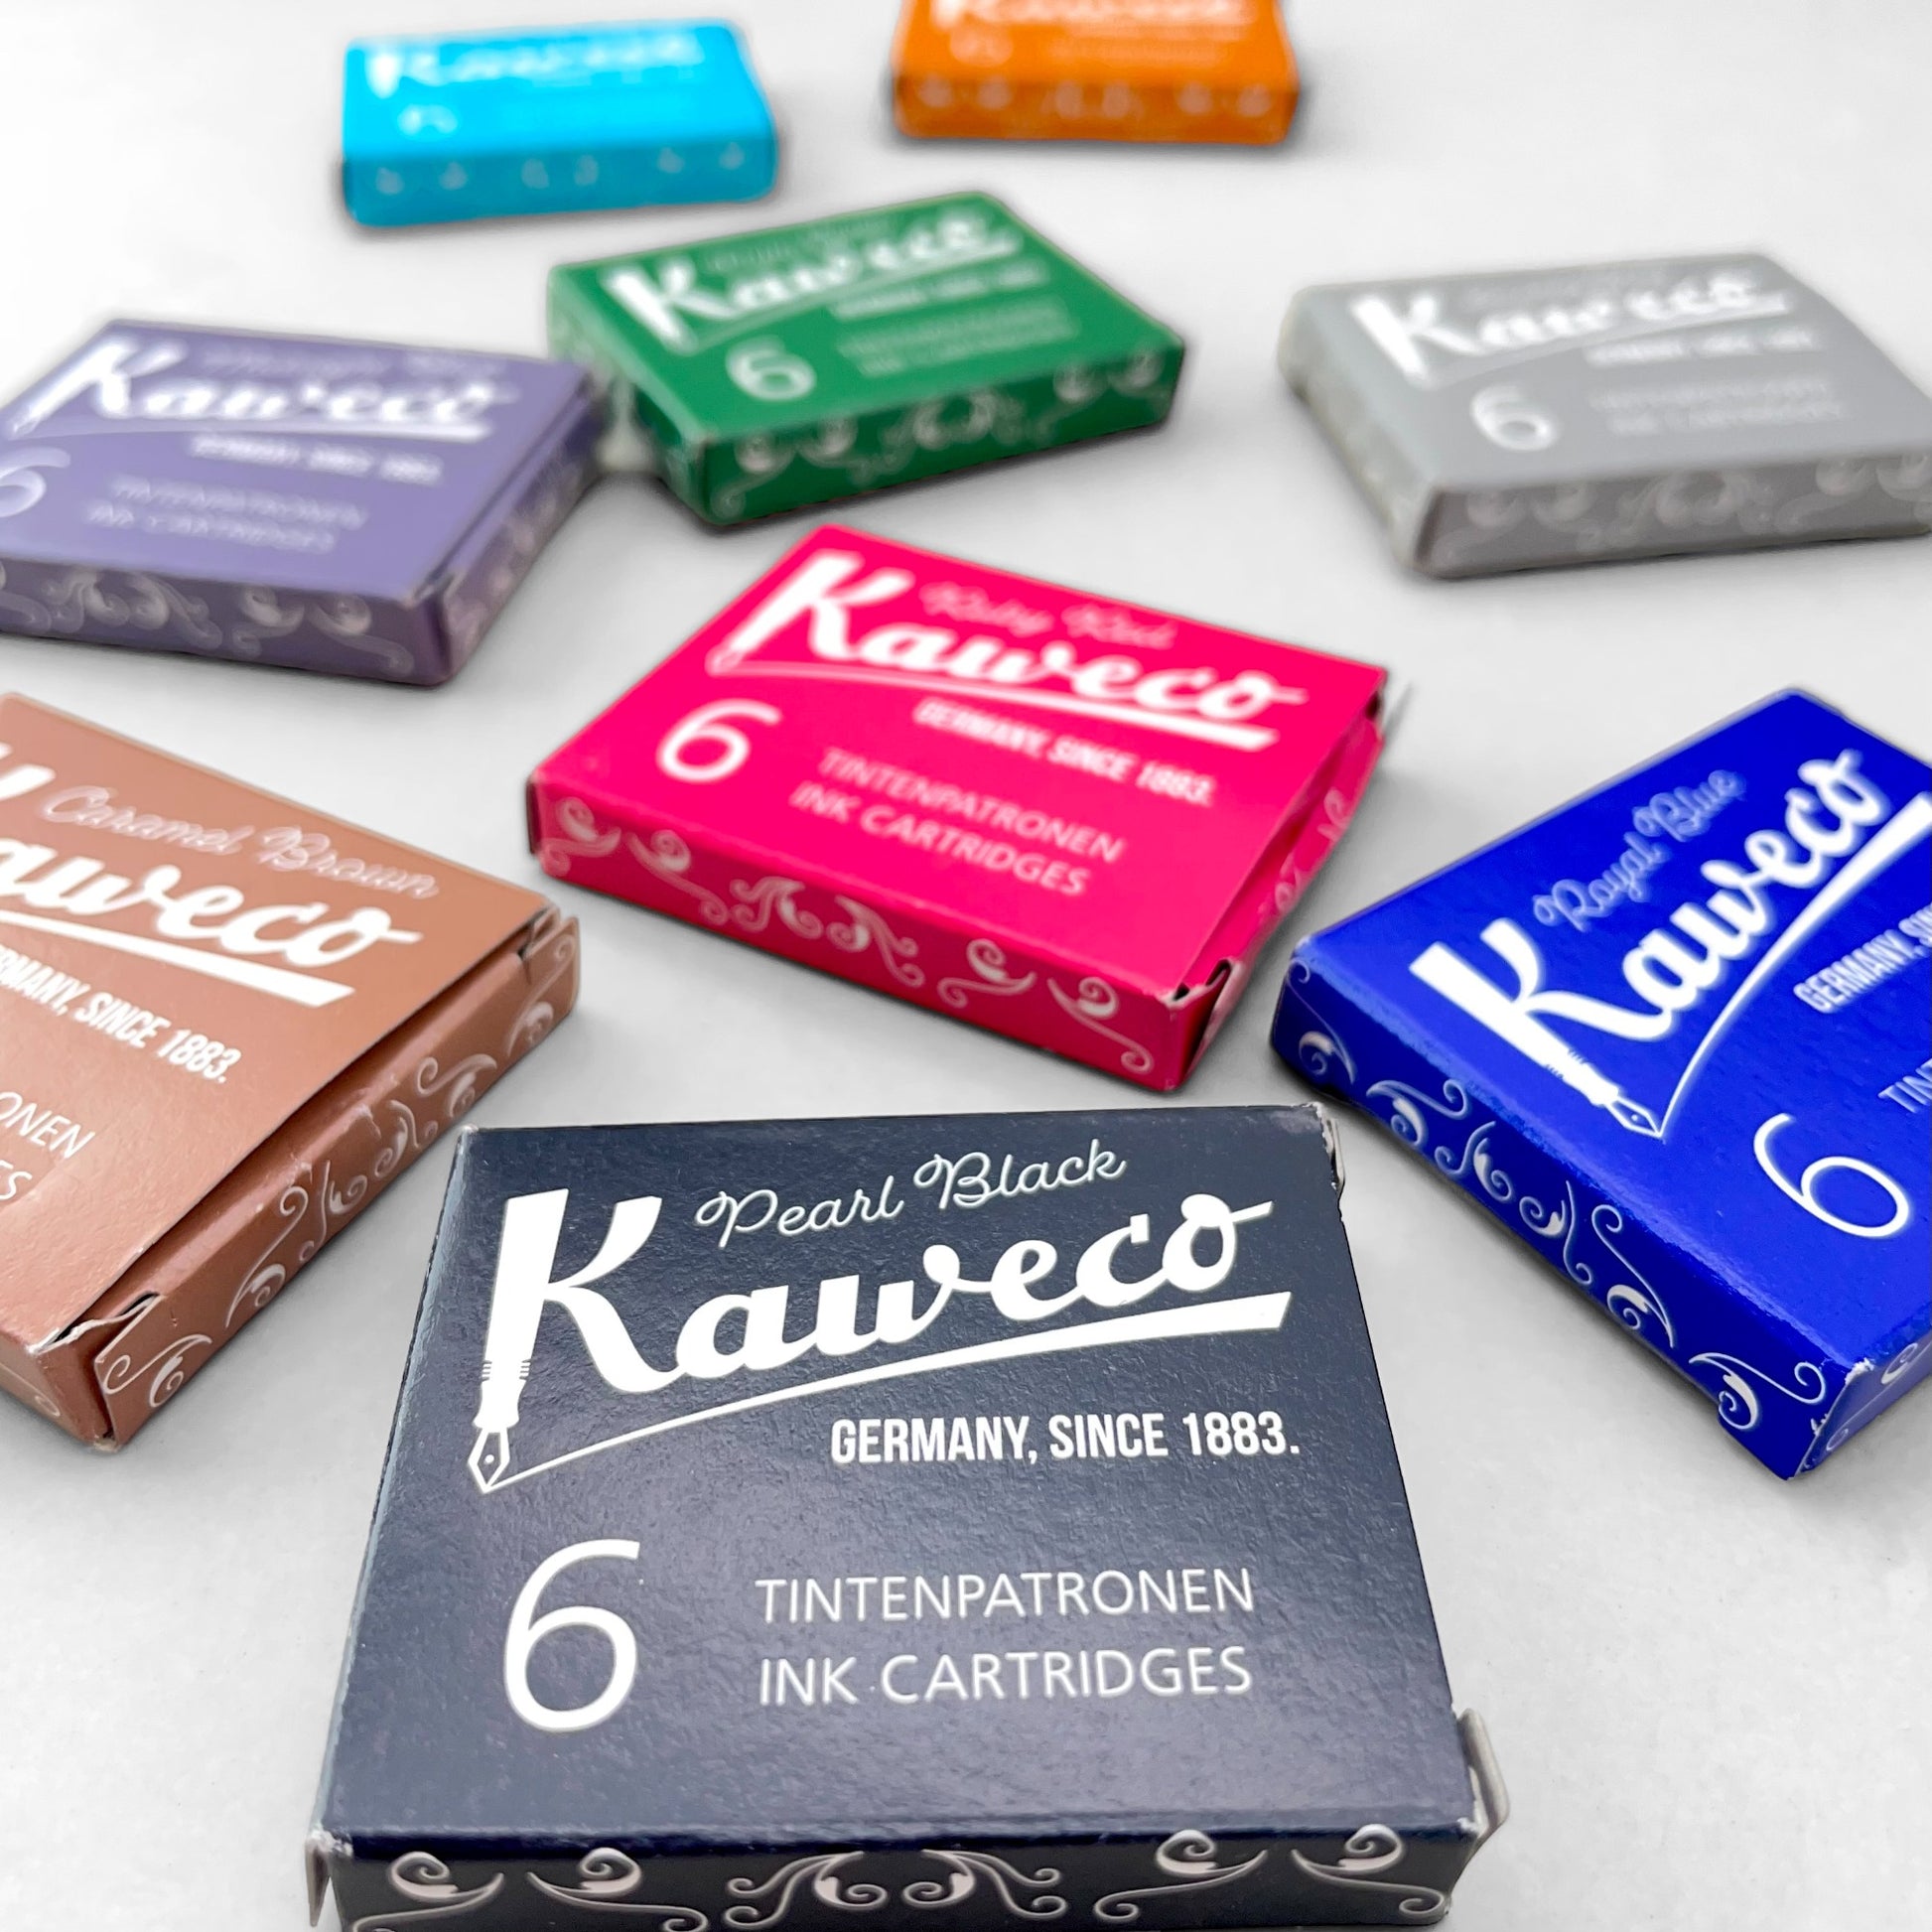 Box of 6 ink cartridges by Kaweco in caramel brown colour